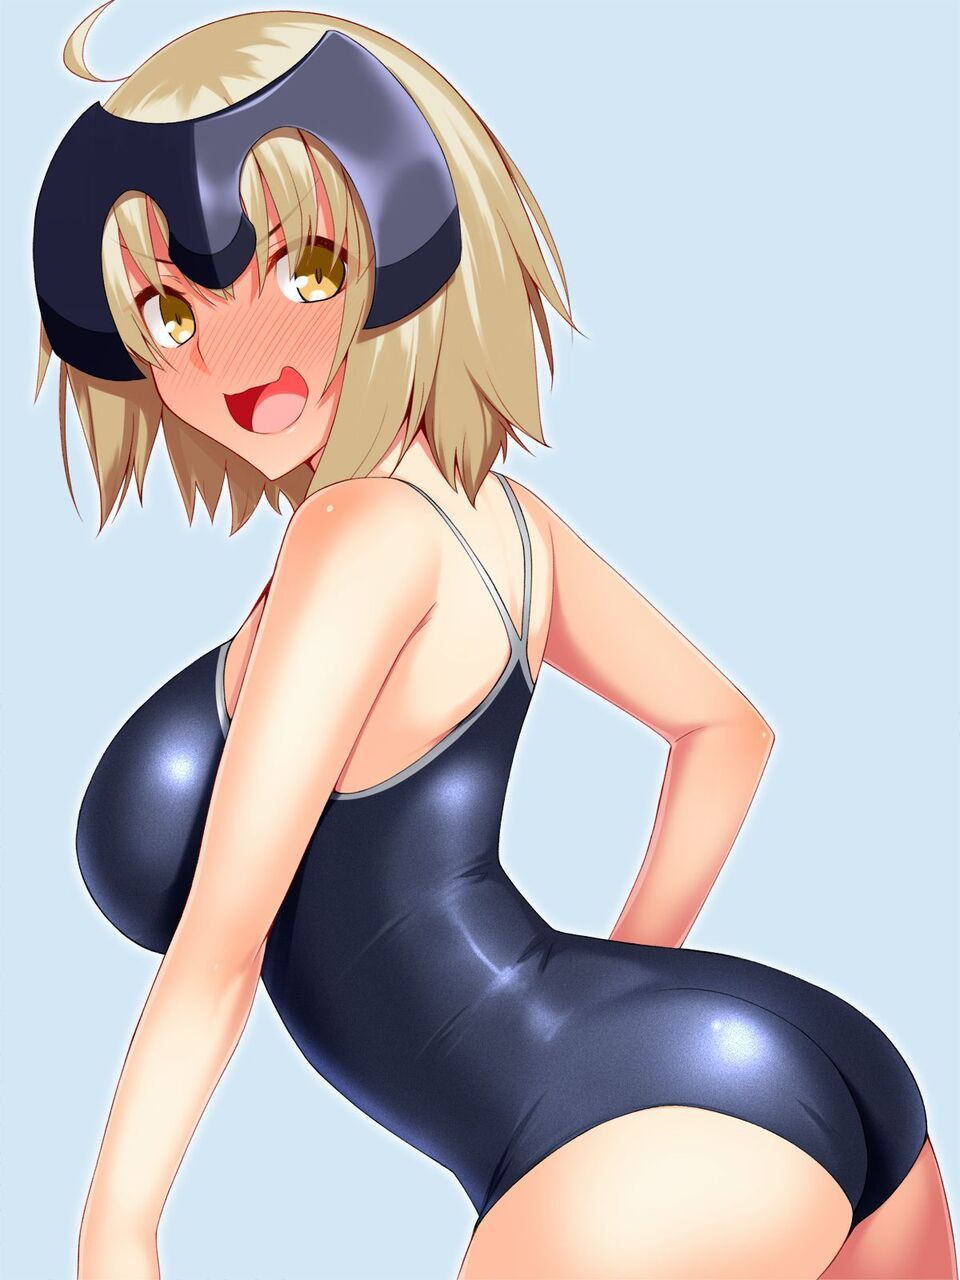 【Sukusui】An image of a suku water girl who looks good on the dazzling sun Part 2 1